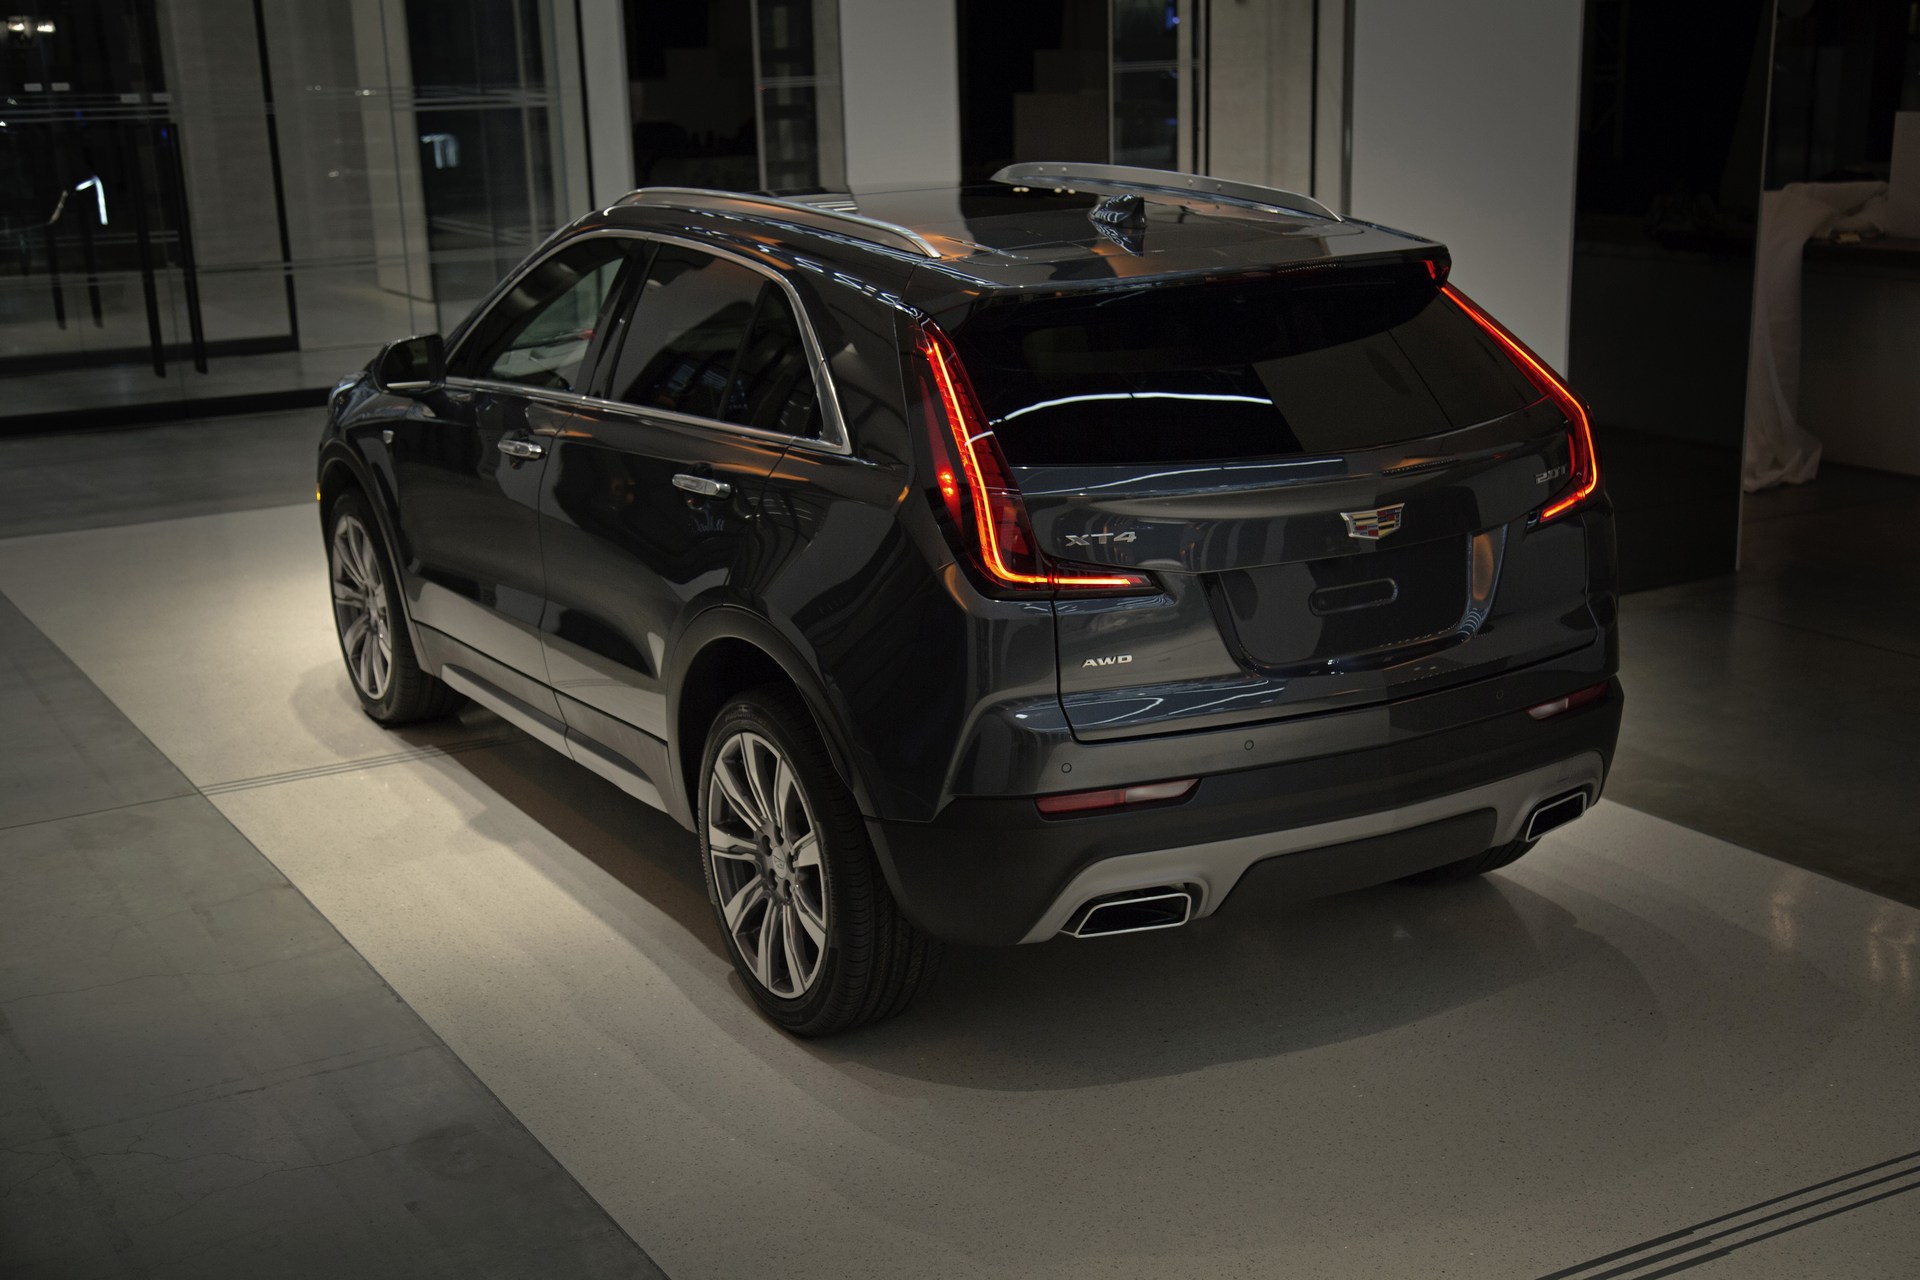 2019 Cadillac Xt4 Baby Suv Debuts With Turbo Power And